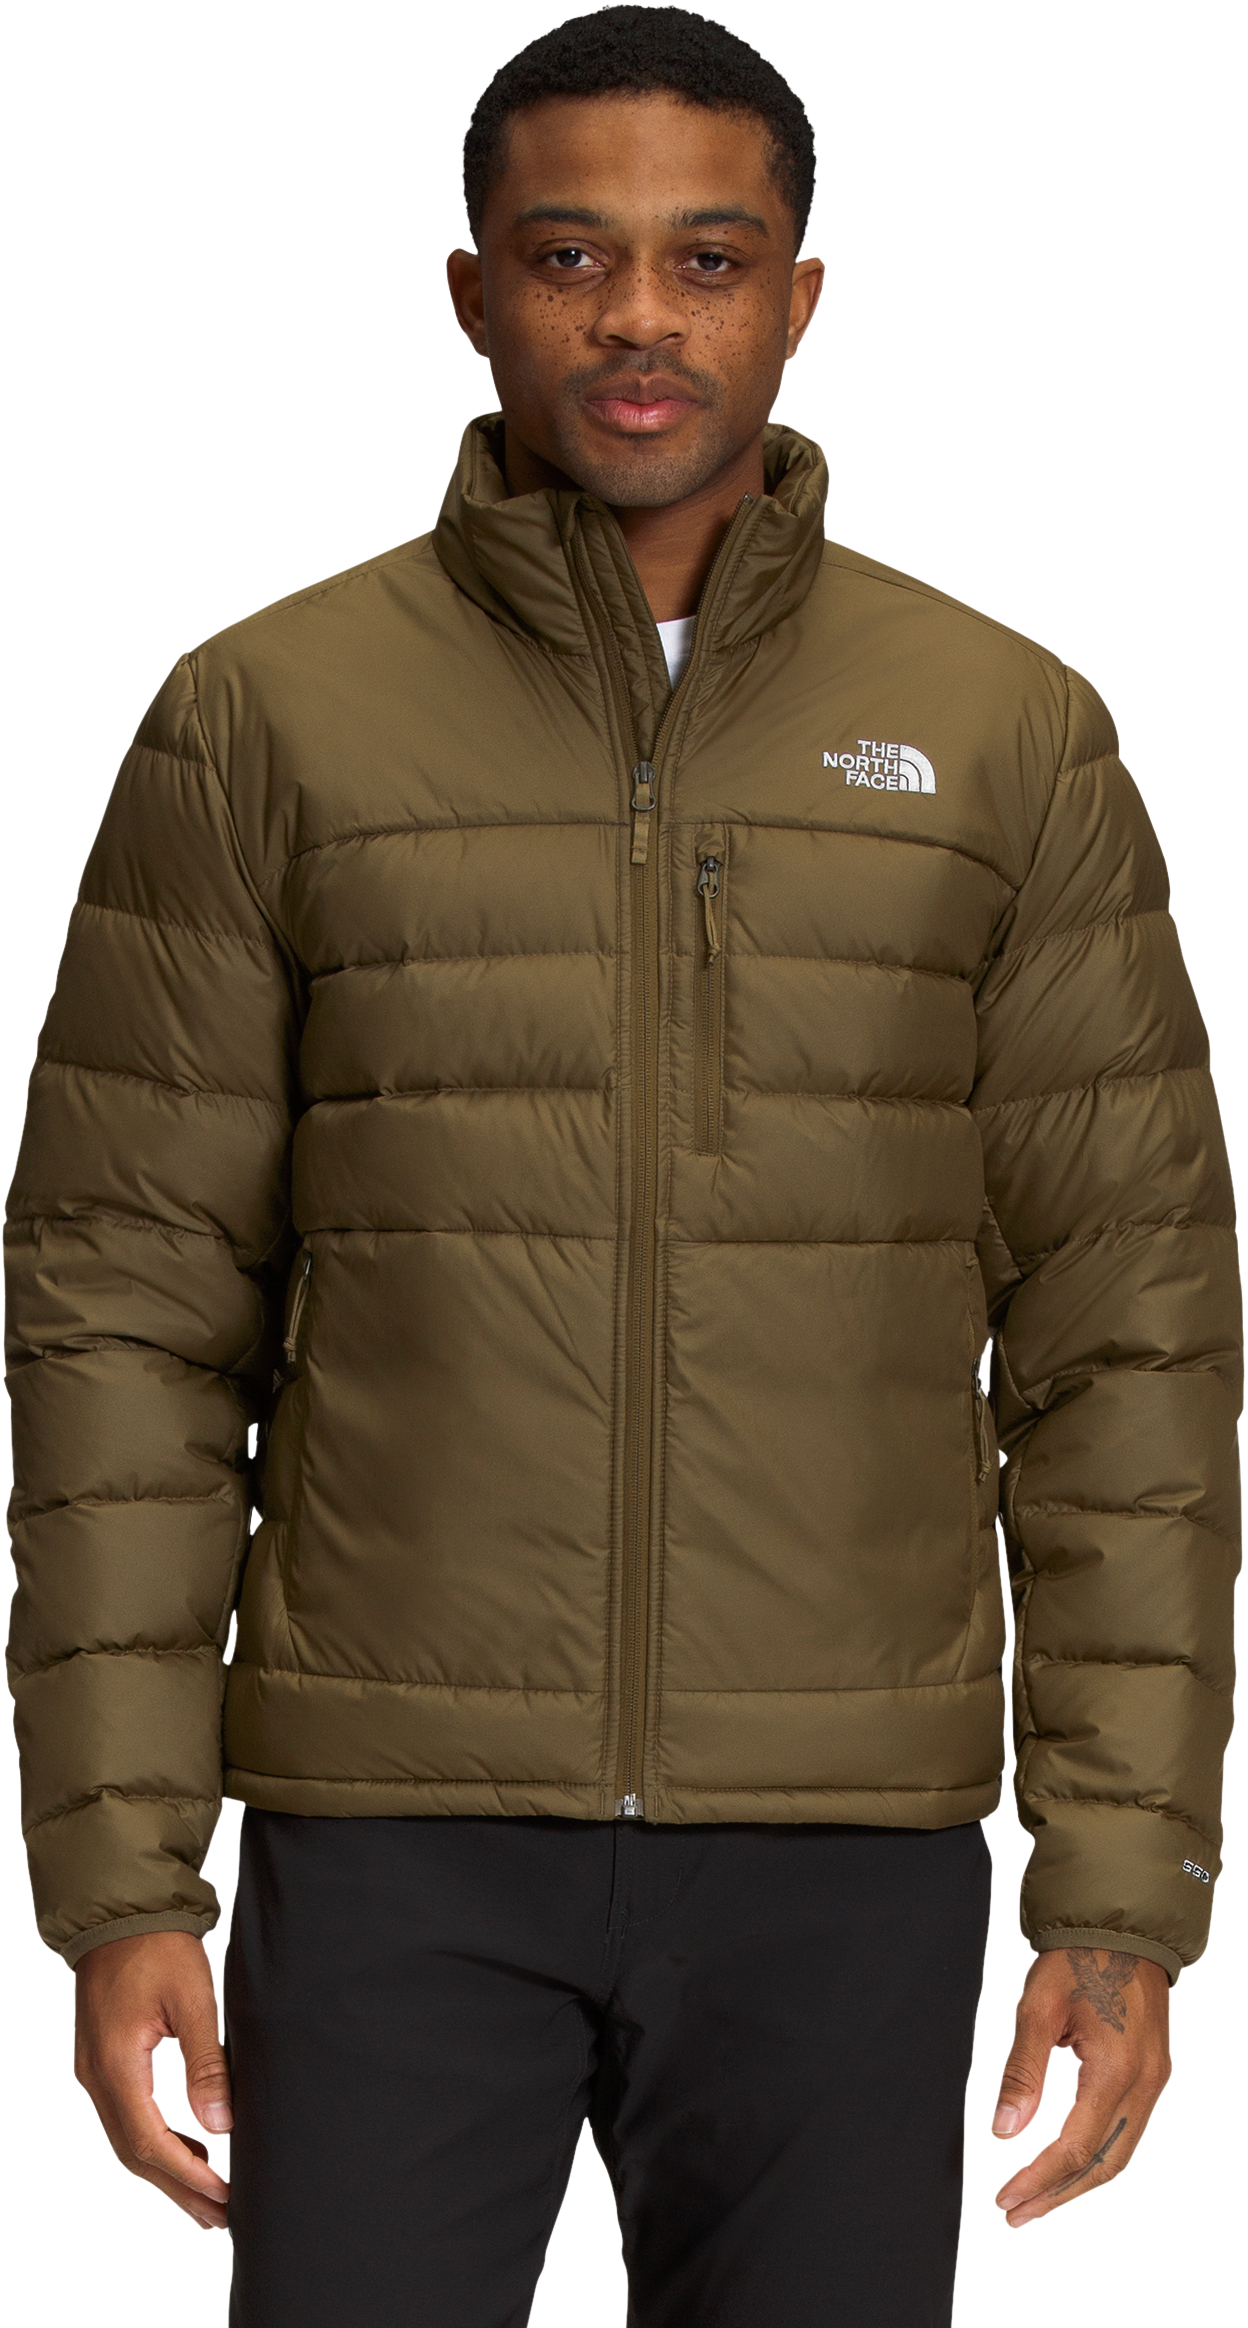 The North Face Aconcagua 2 Jacket for Men - Military Olive - M